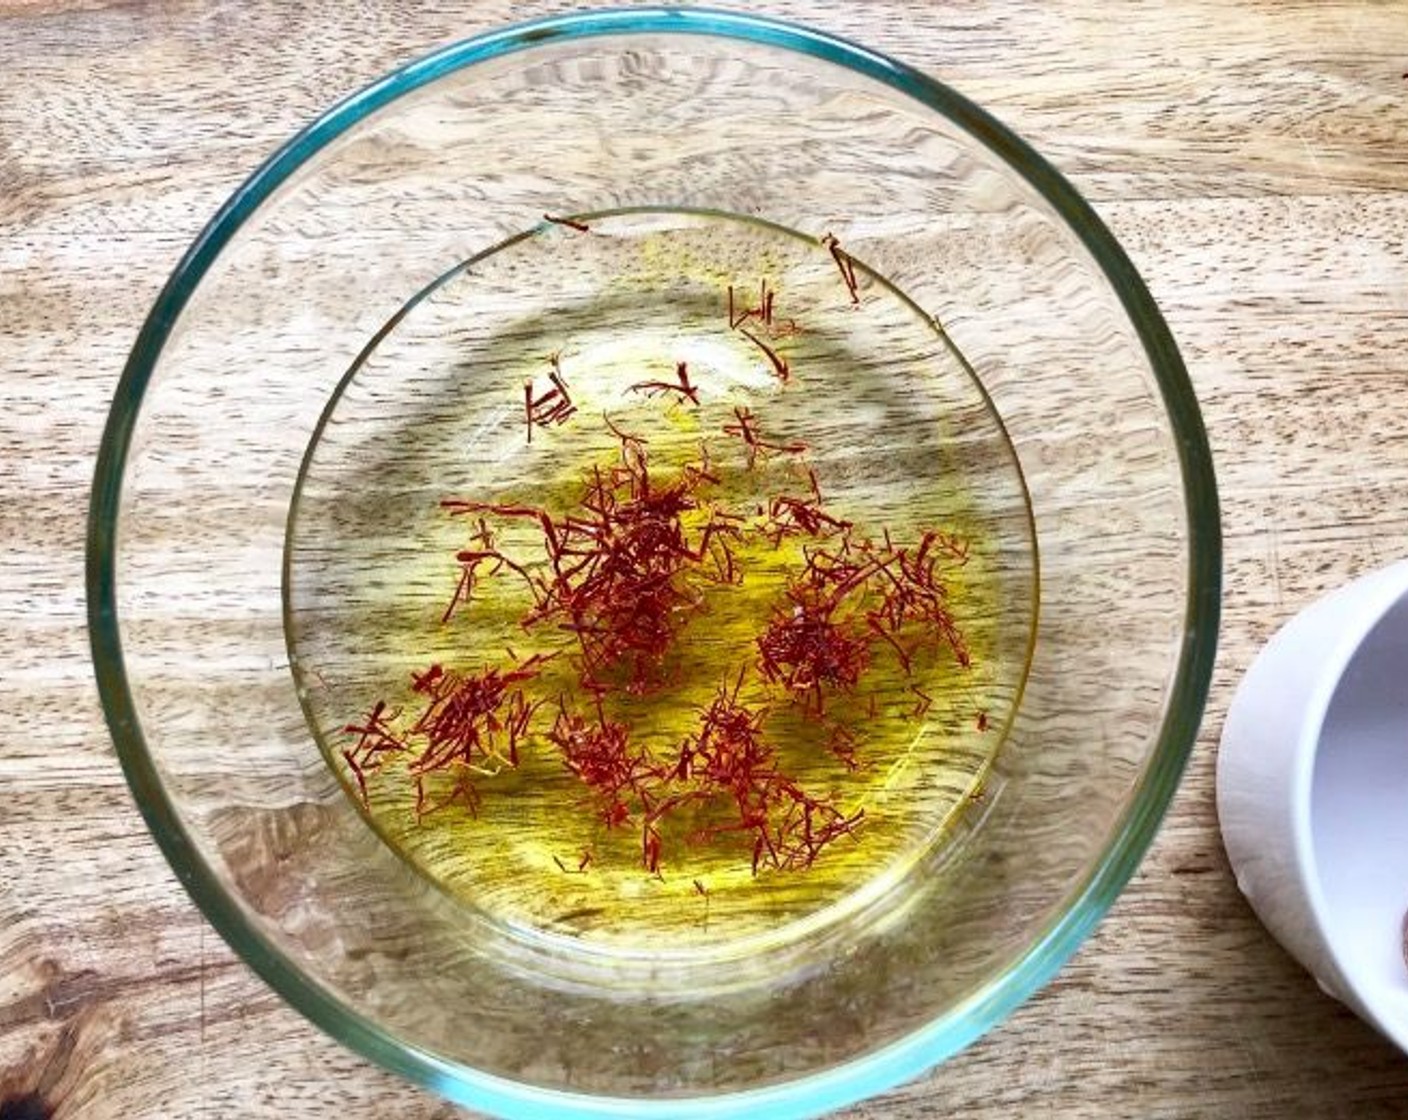 step 1 Place the Dry White Wine (1/2 cup) and Saffron Threads (1/4 tsp) in a small bowl. Set aside to allow the threads to soften.